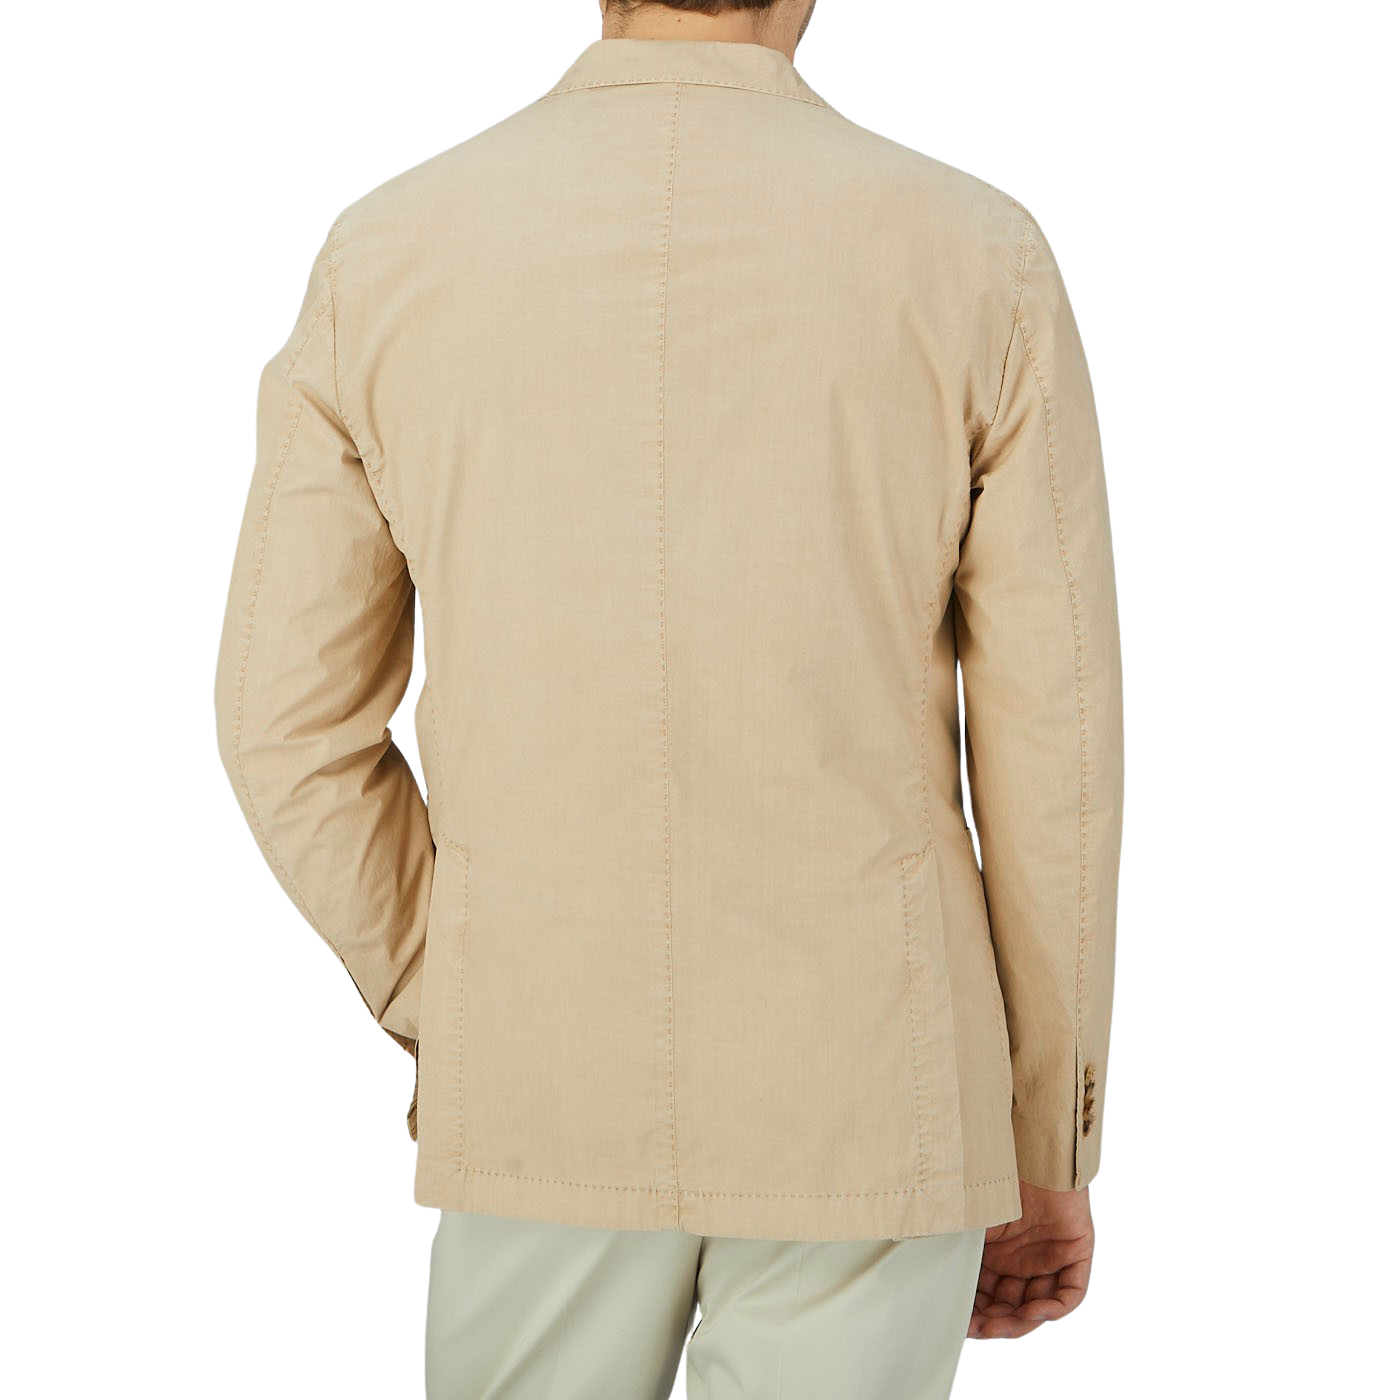 The skilled craftsmanship of a Boglioli K Jacket is evident in the design of this tan Boglioli jacket, which is showcased from the back view on a man.